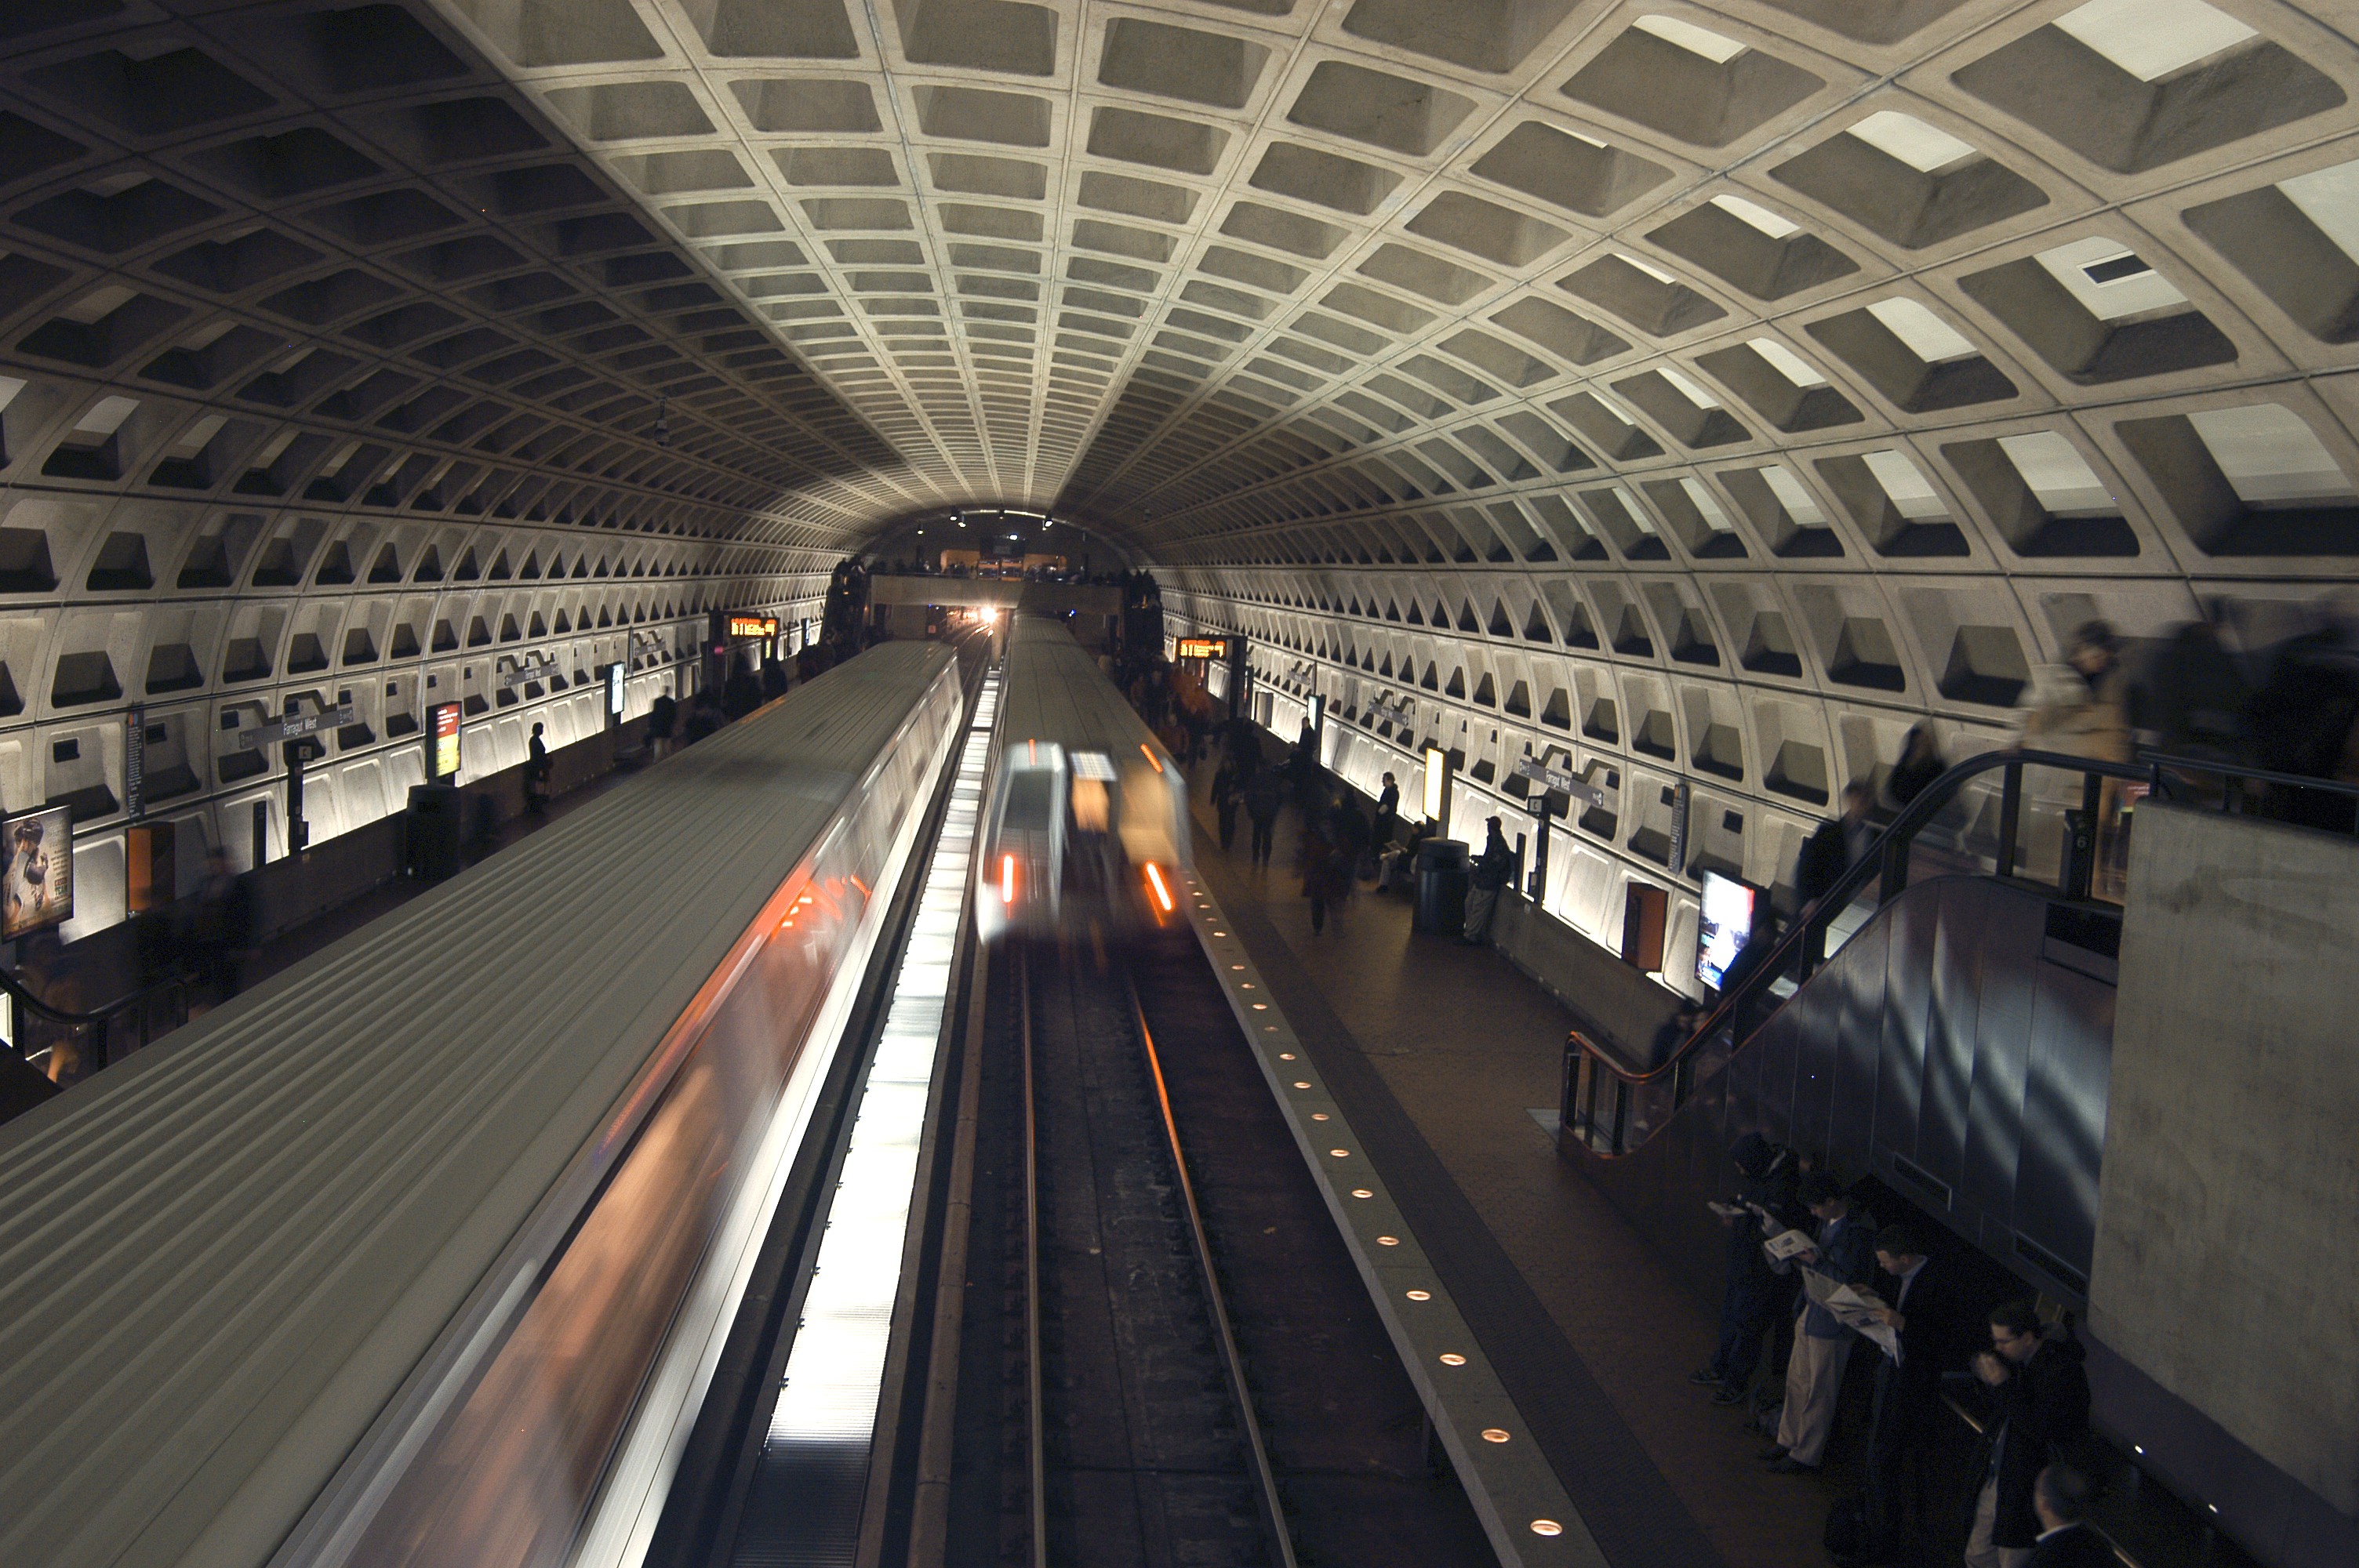 Local leaders announce continuing work on Metro Safety Commission